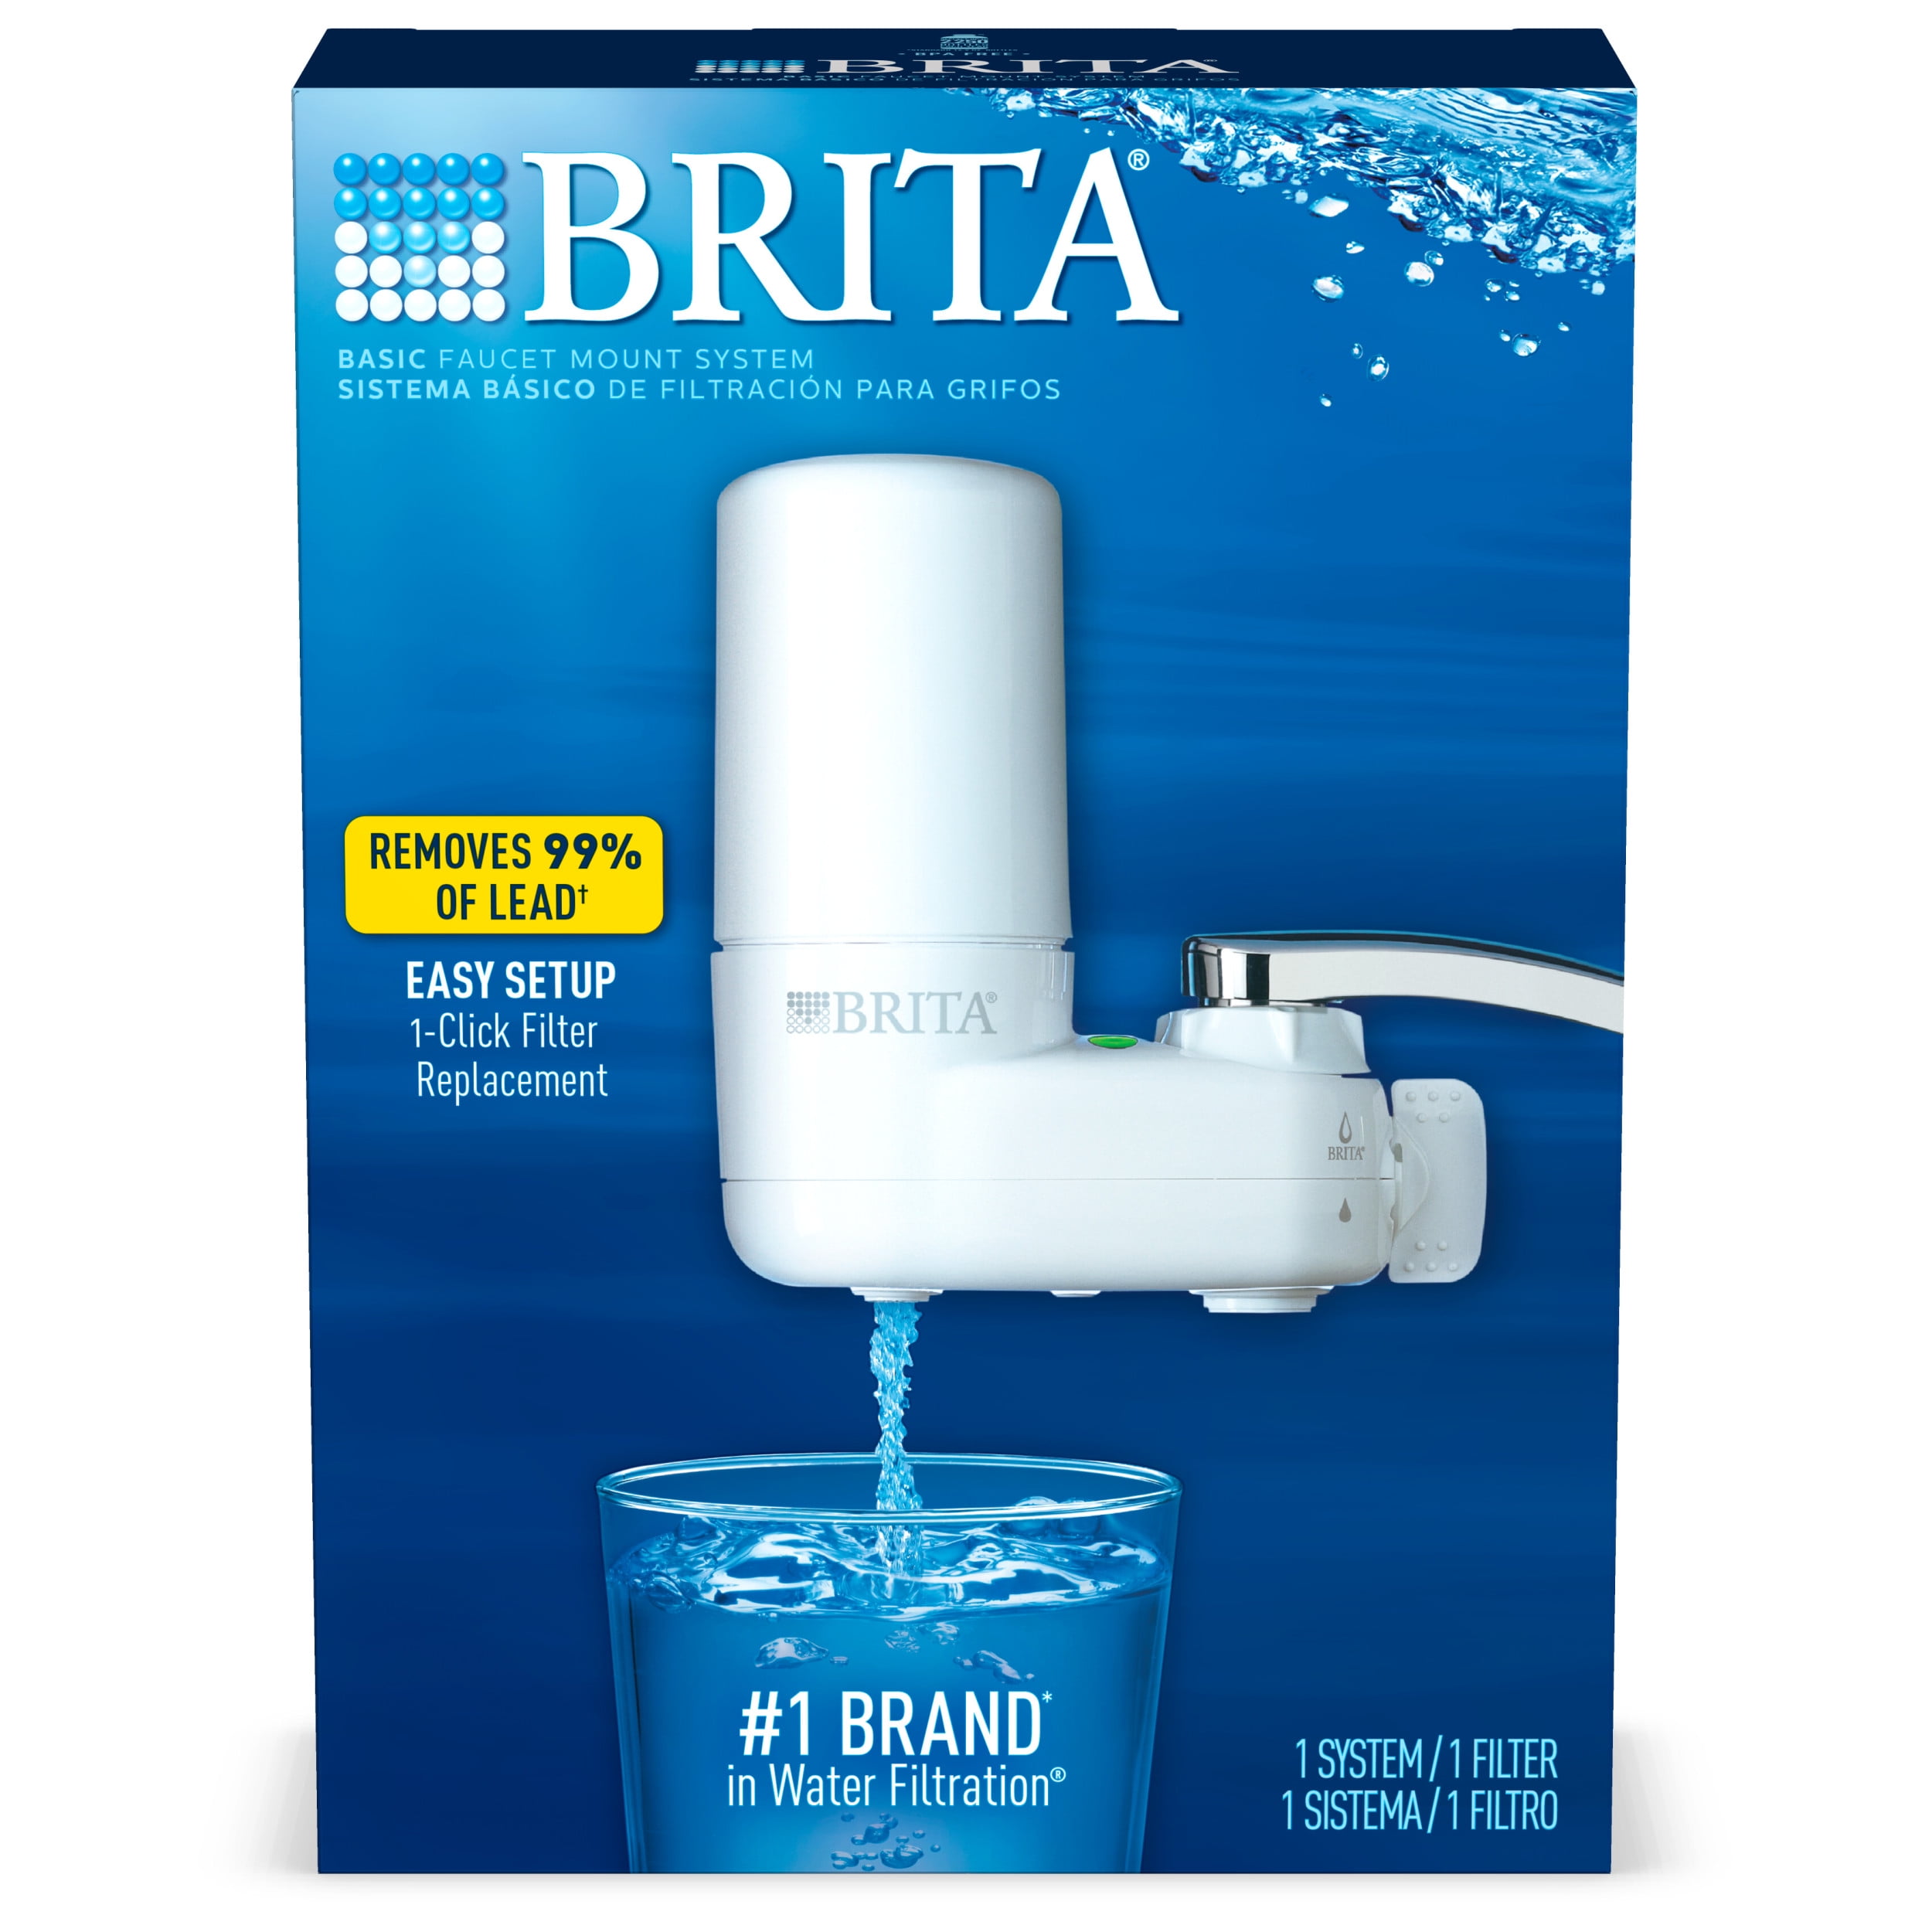 Brita Basic Faucet Mount System, Water Filter Reduces Lead and Chlorine, White